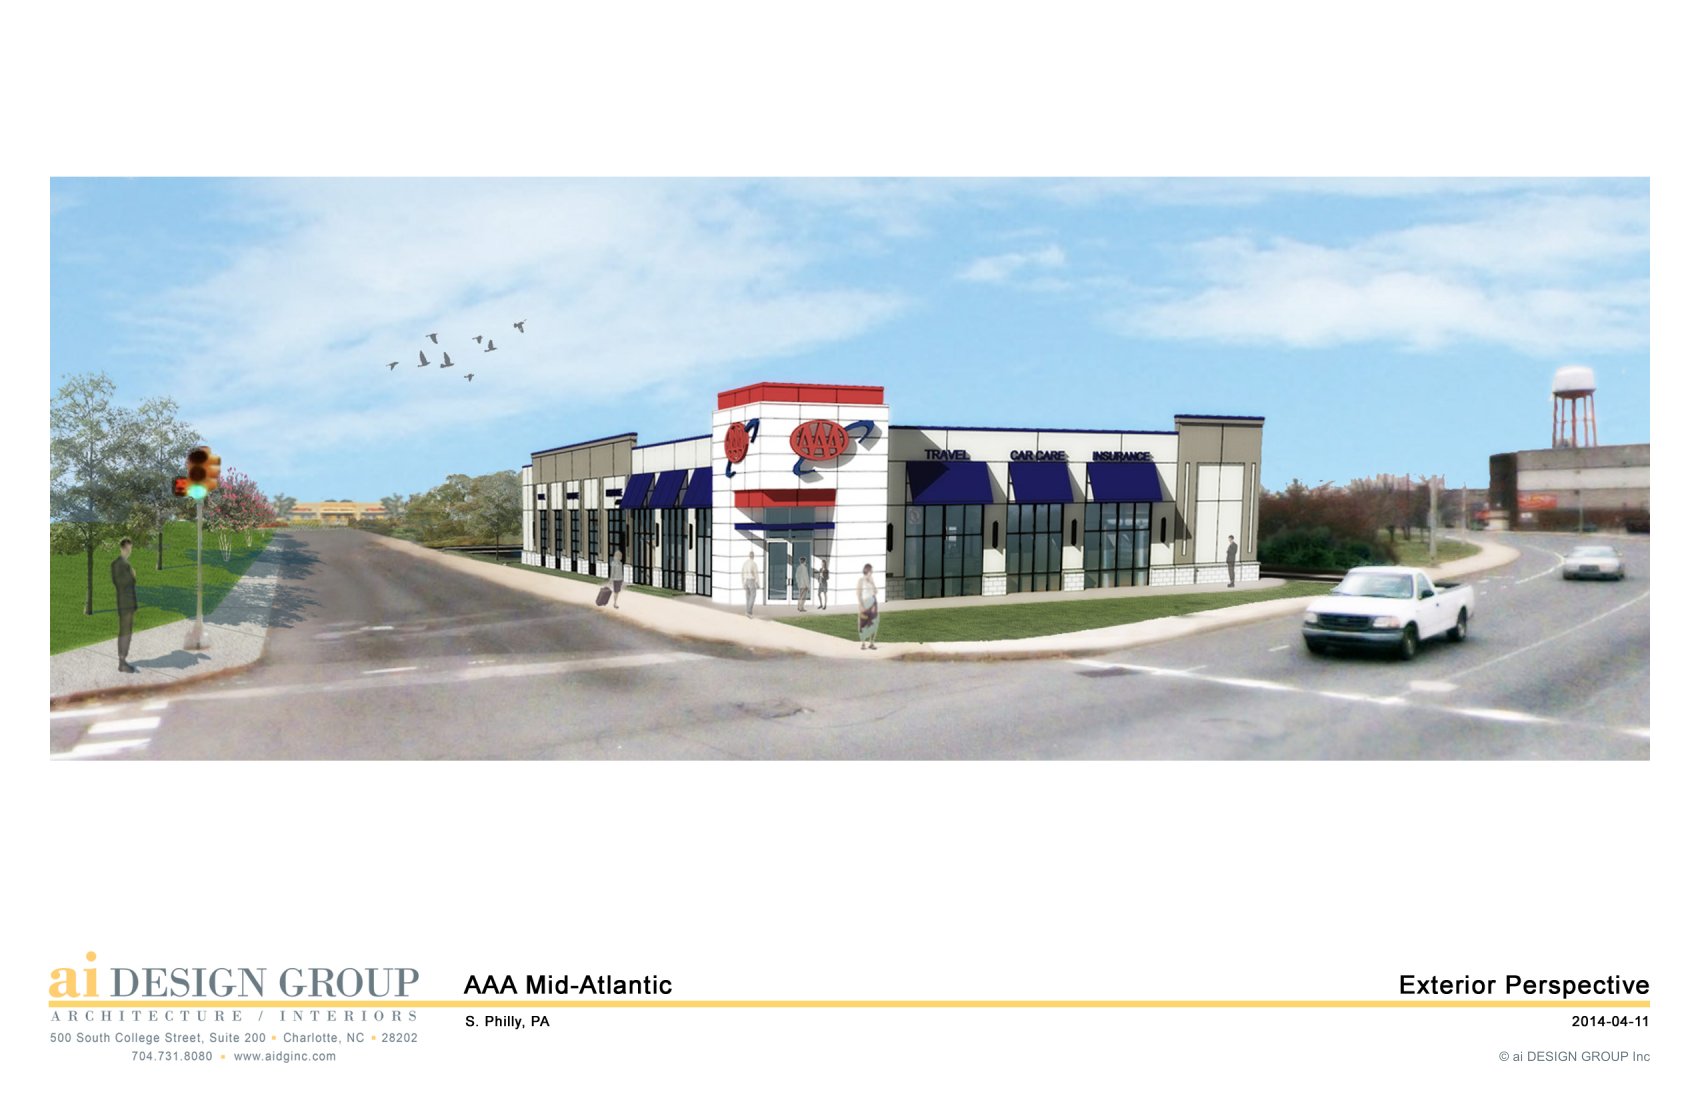 AAA rendering for proposed Columbus Ave. store